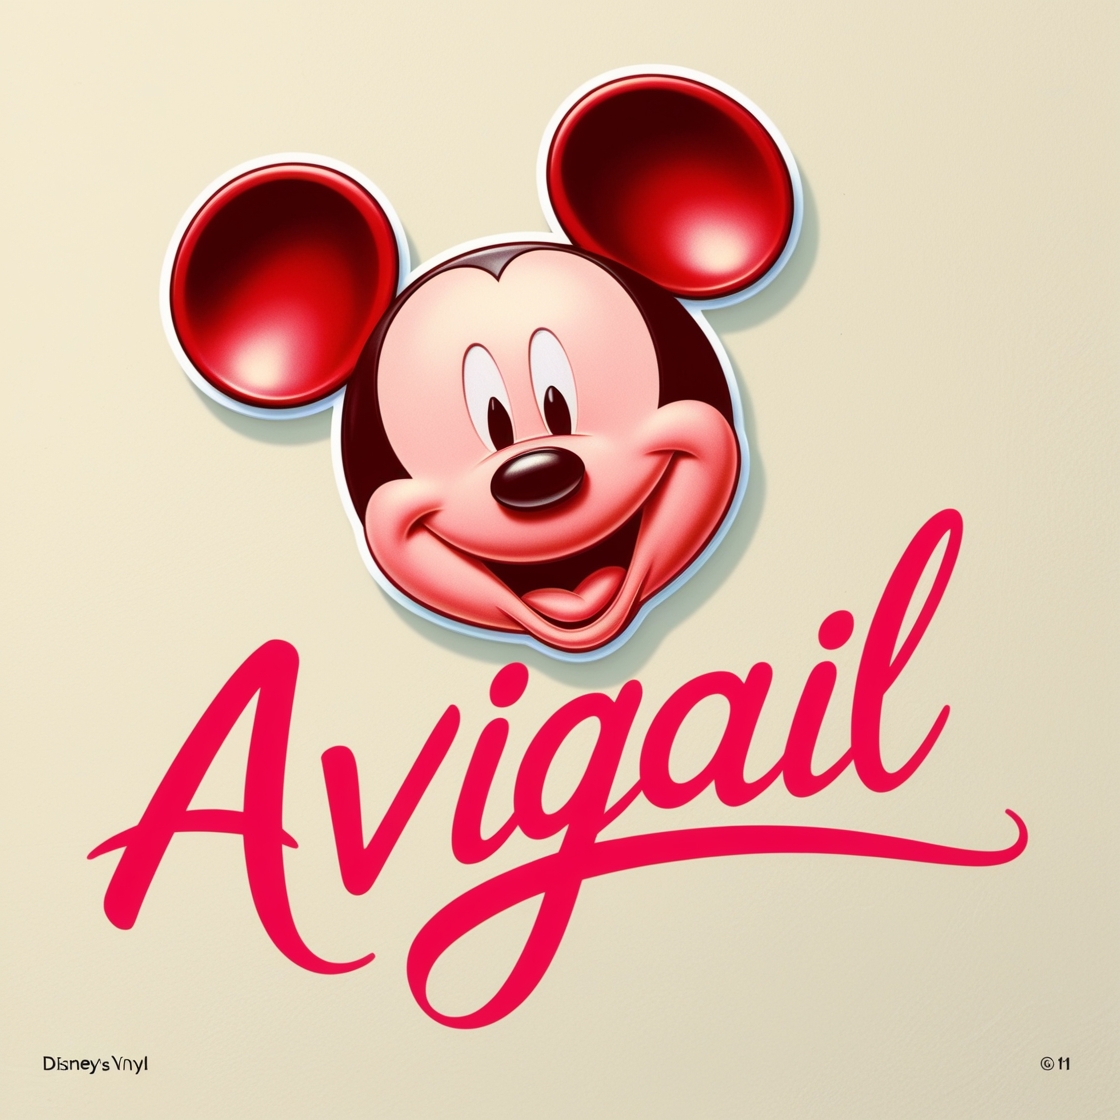 Default_A_vibrant_red_Mickey_Mouse_rendered_in_glossy_vinyl_ag_0.jpg